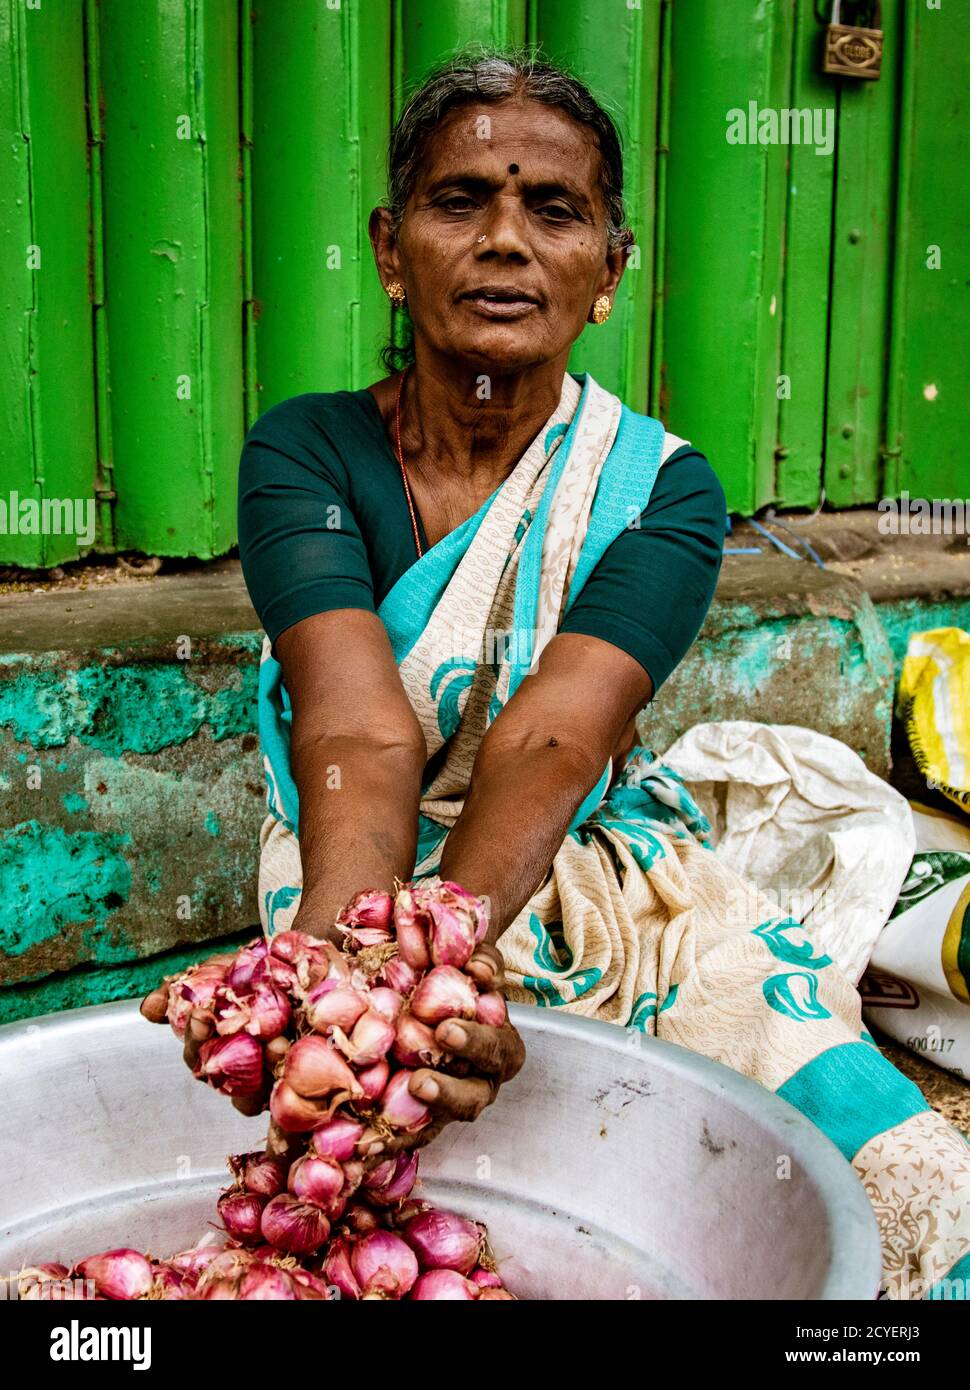 Madurai, India, Mar 8, 2018 - Woman shows the onions she is selling Stock Photo